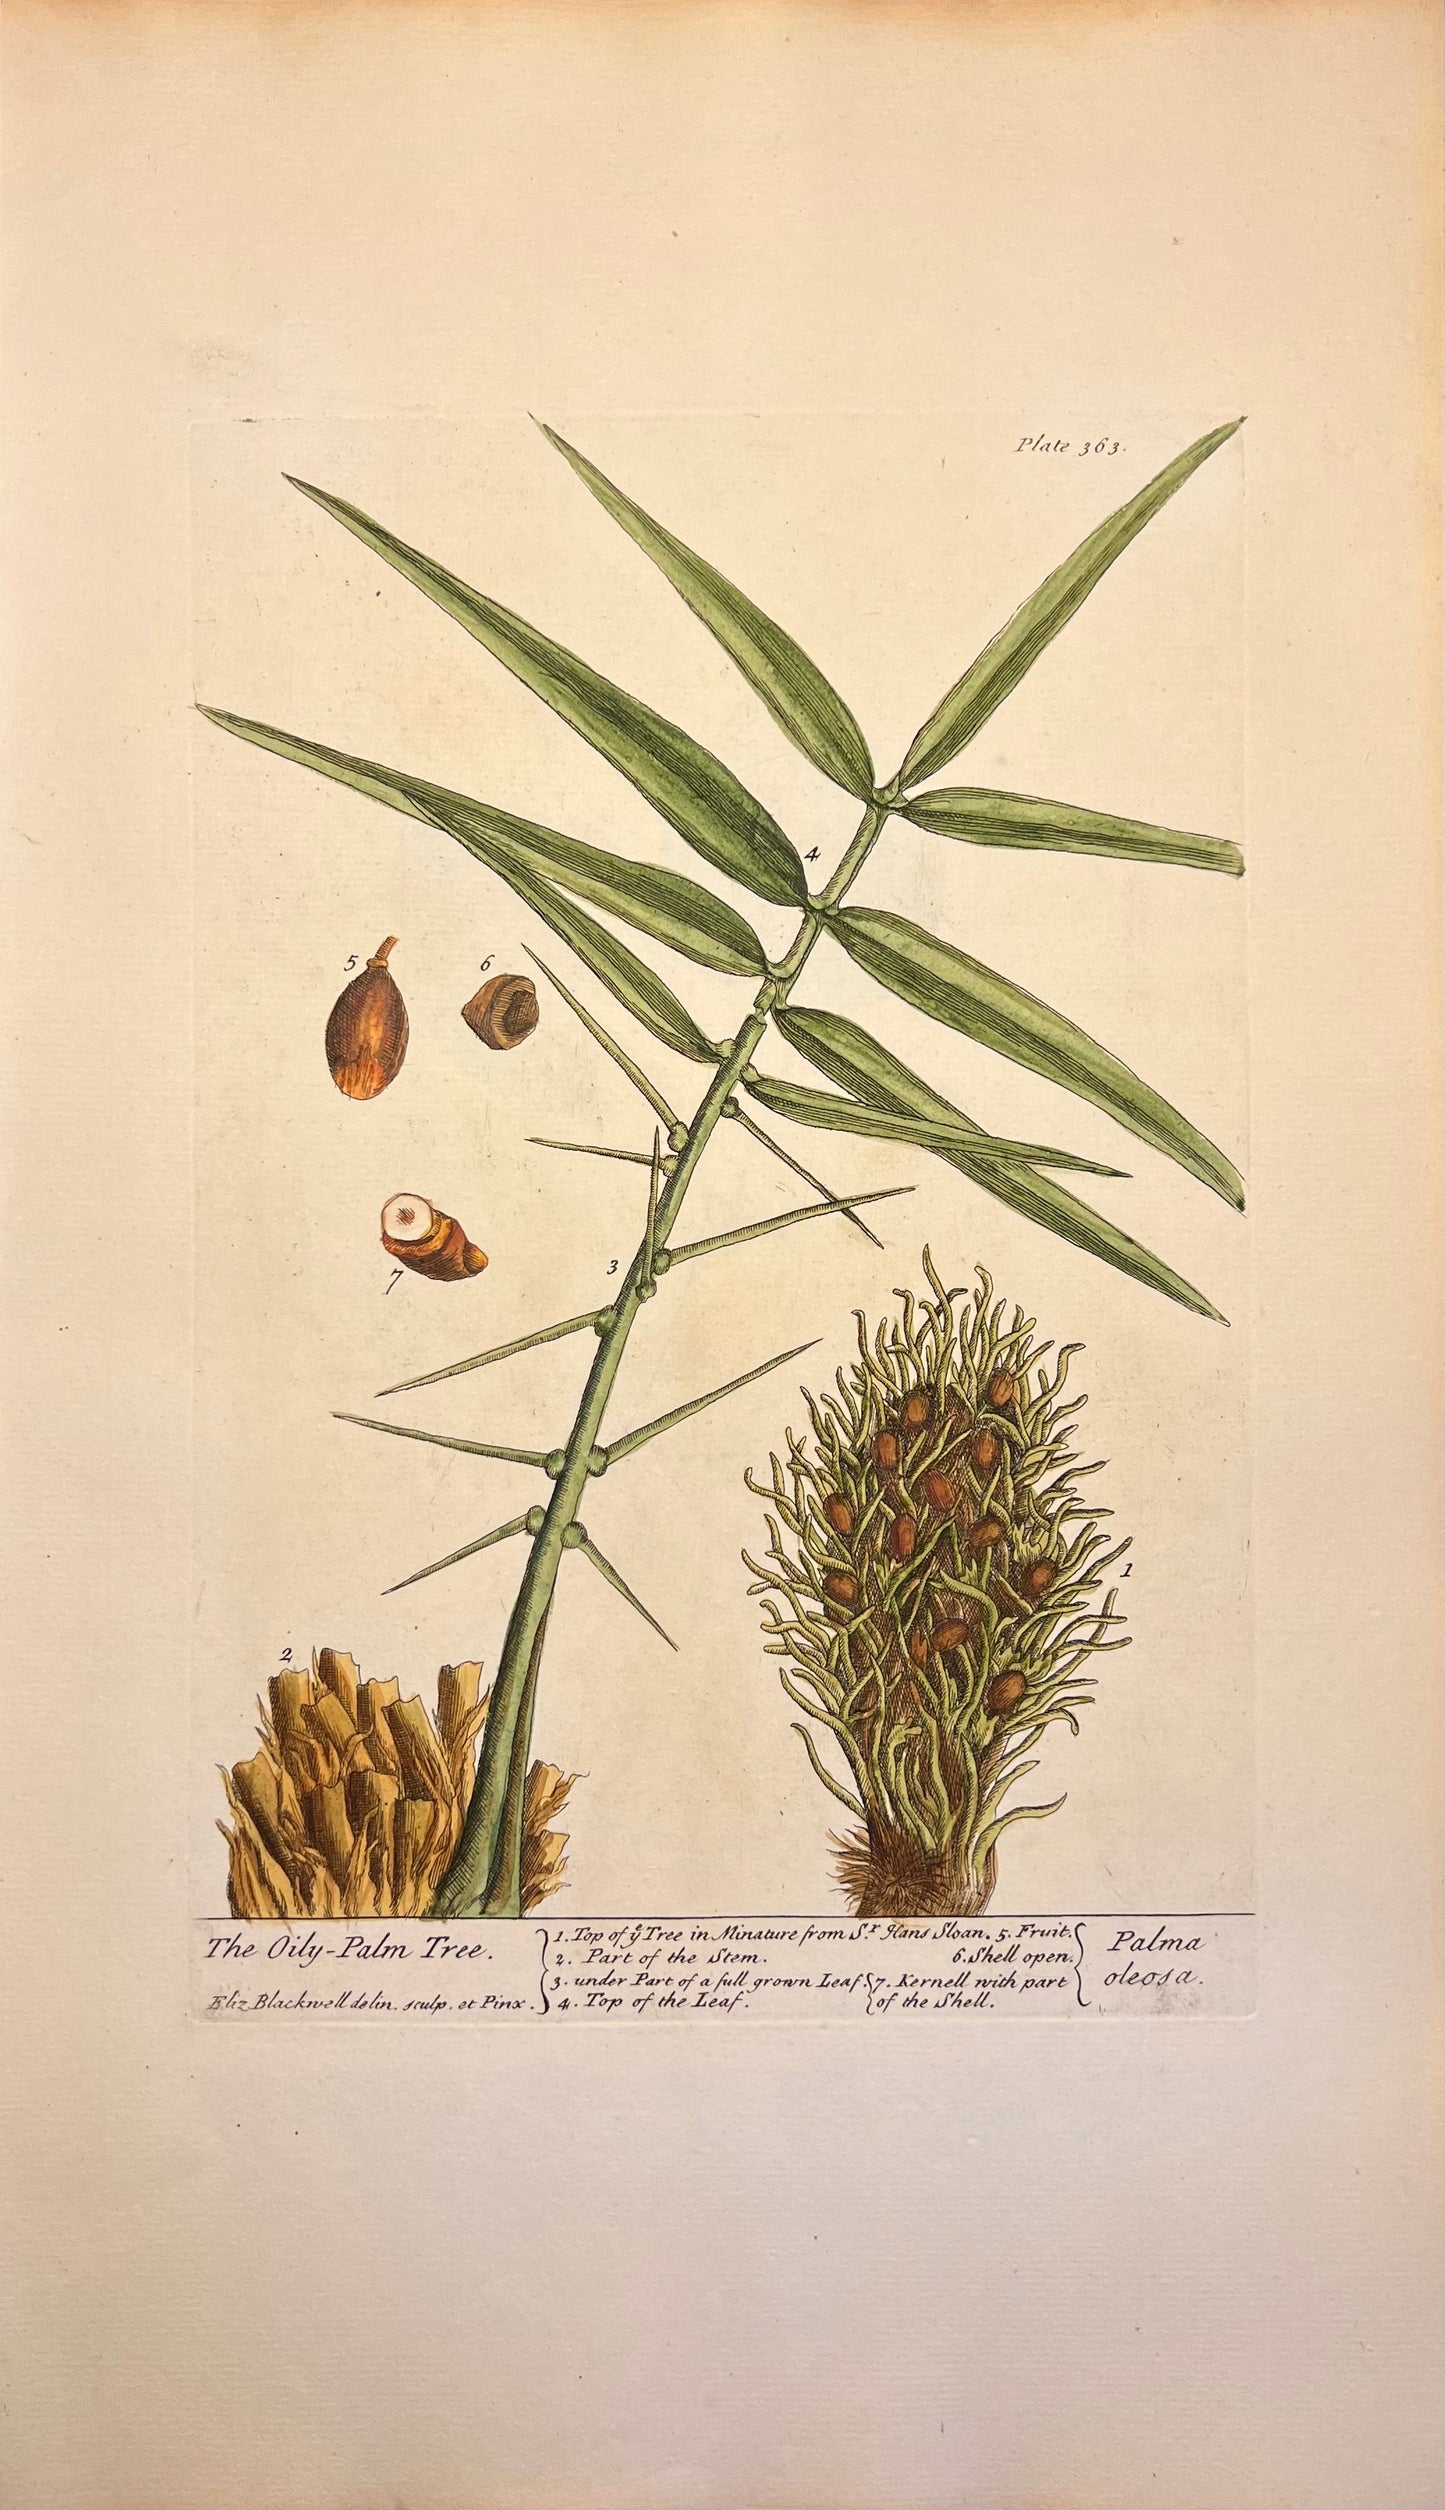 The Oily-Palm Tree, Plate #363, From Elizabeth Blackwell's 'A Curious Herbal'